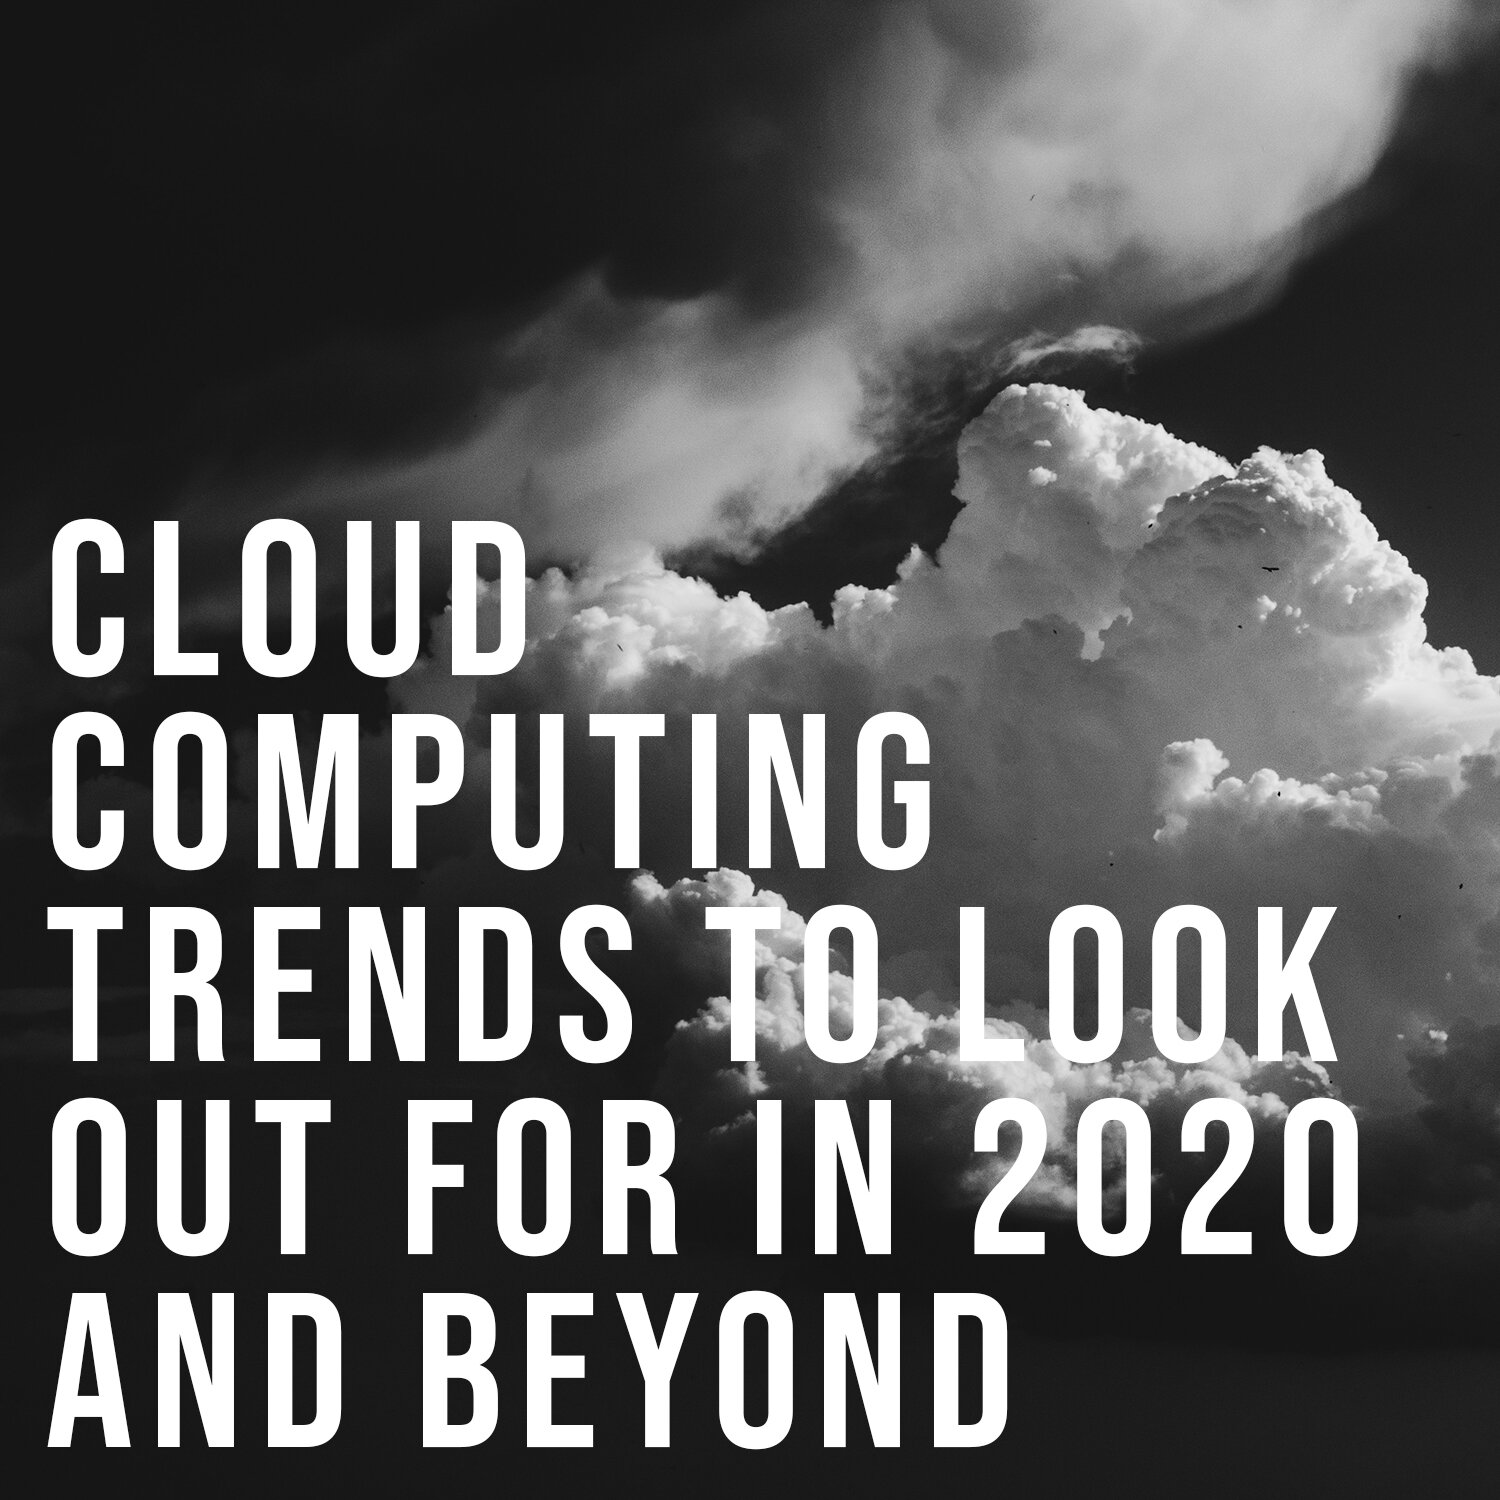 Cloud Computing Trends to Watch Out for in 2020 and Beyond